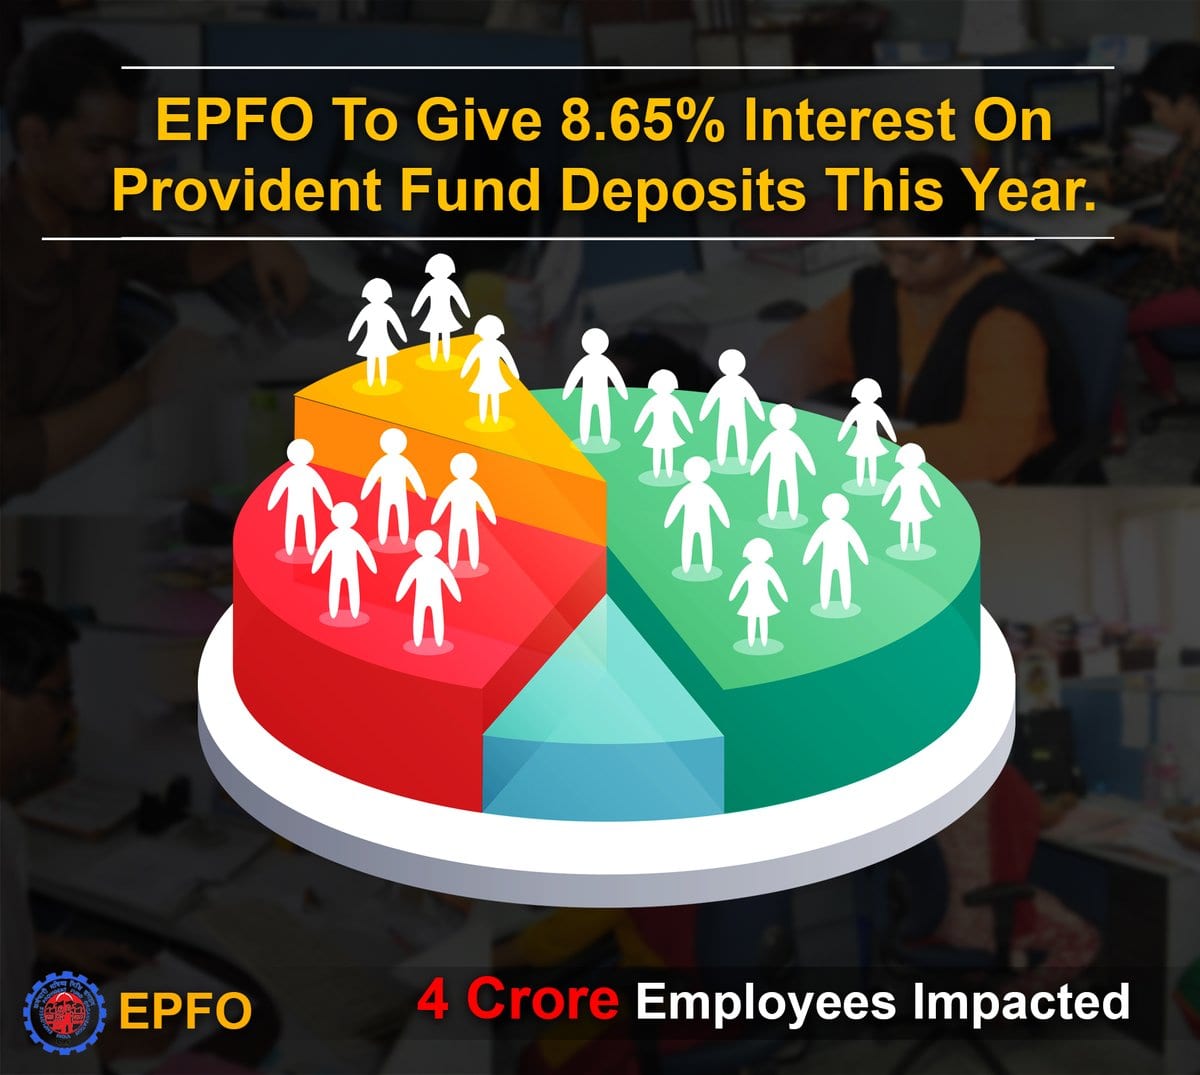 CBT recommends 8.65% interest on EPF to its subscribers for the year 2016-17